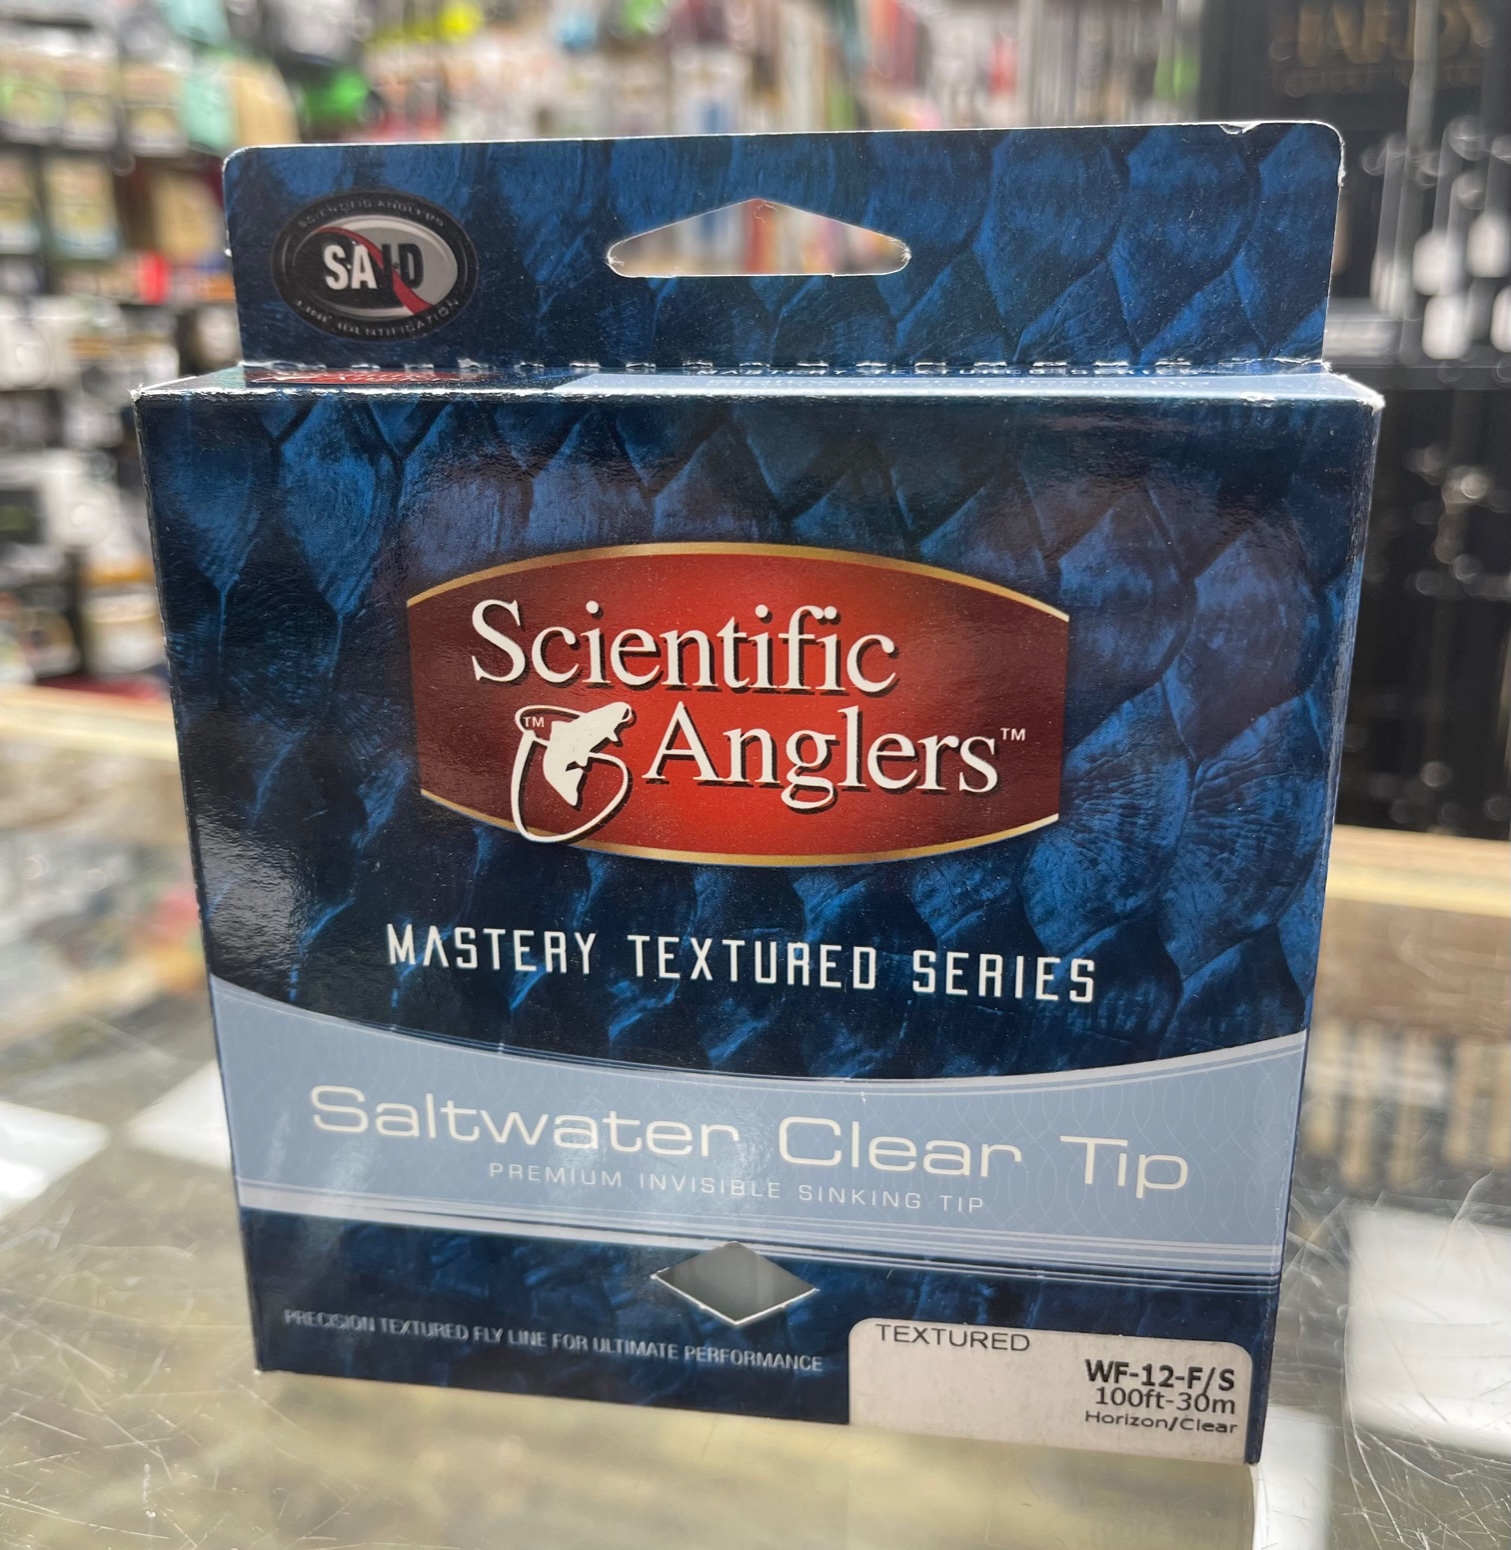 Scientific Anglers Mastery Textured Saltwater Clear Tip - WF10F/I